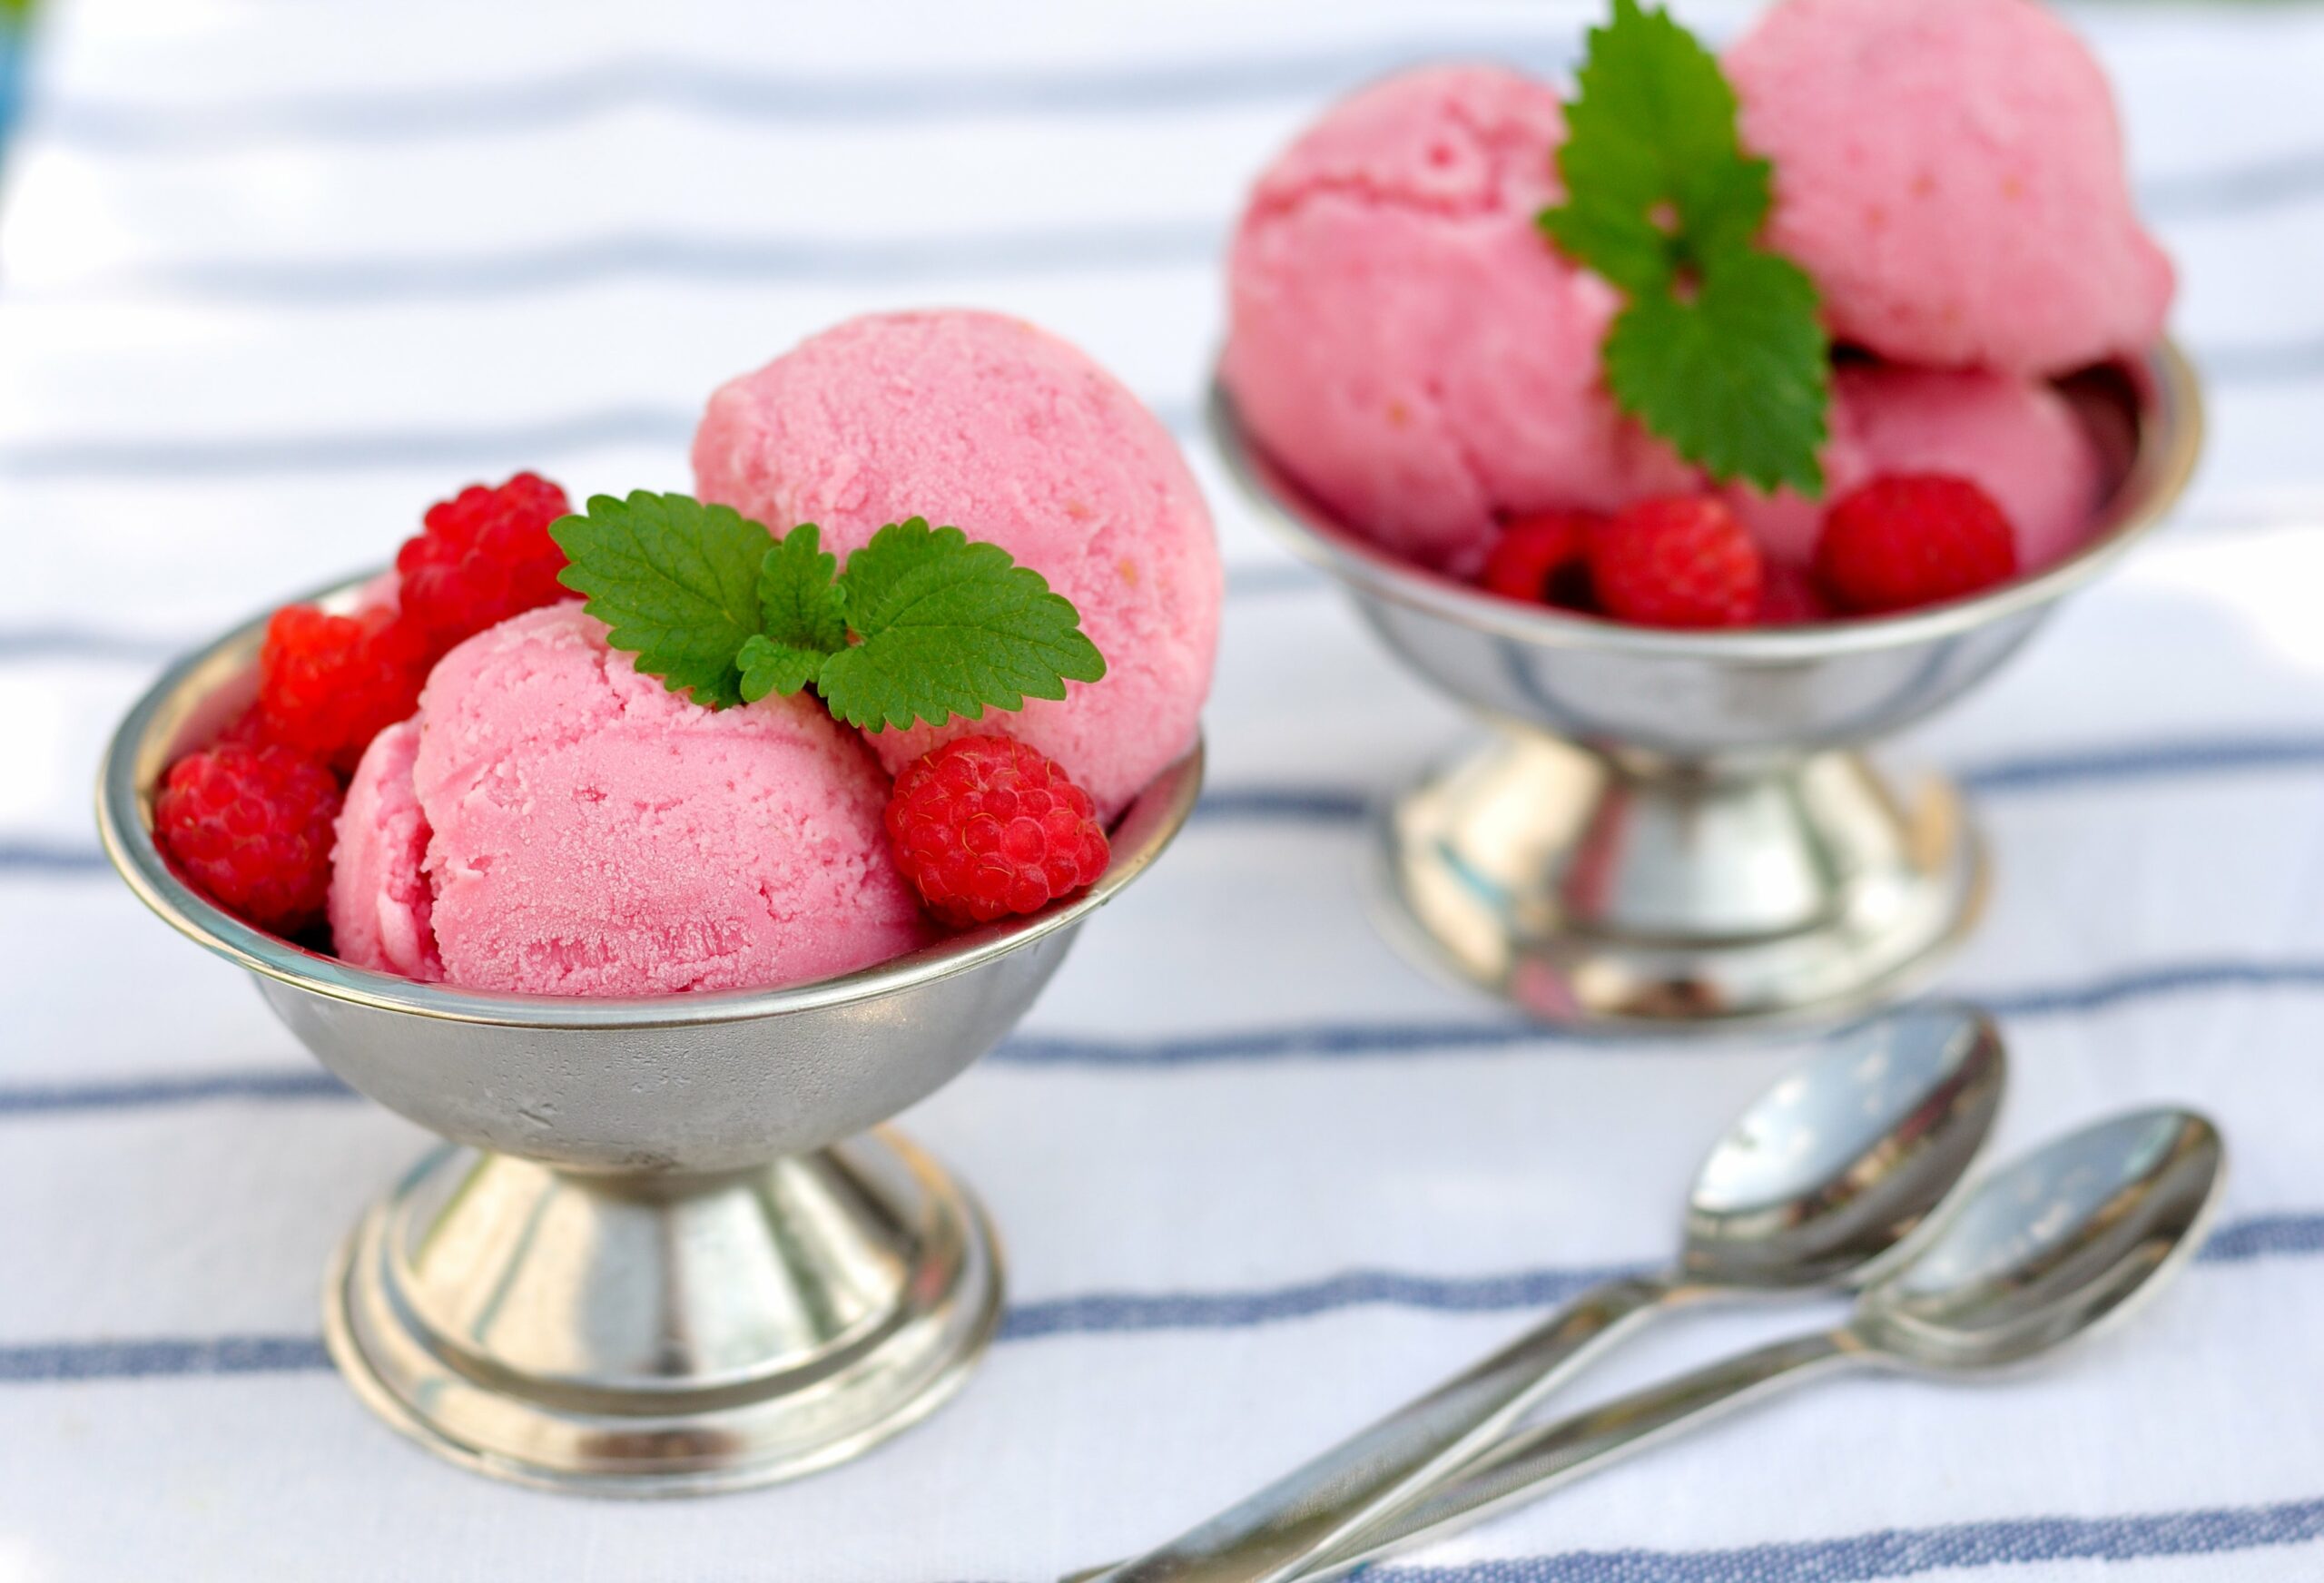 Does sorbet have dairy?